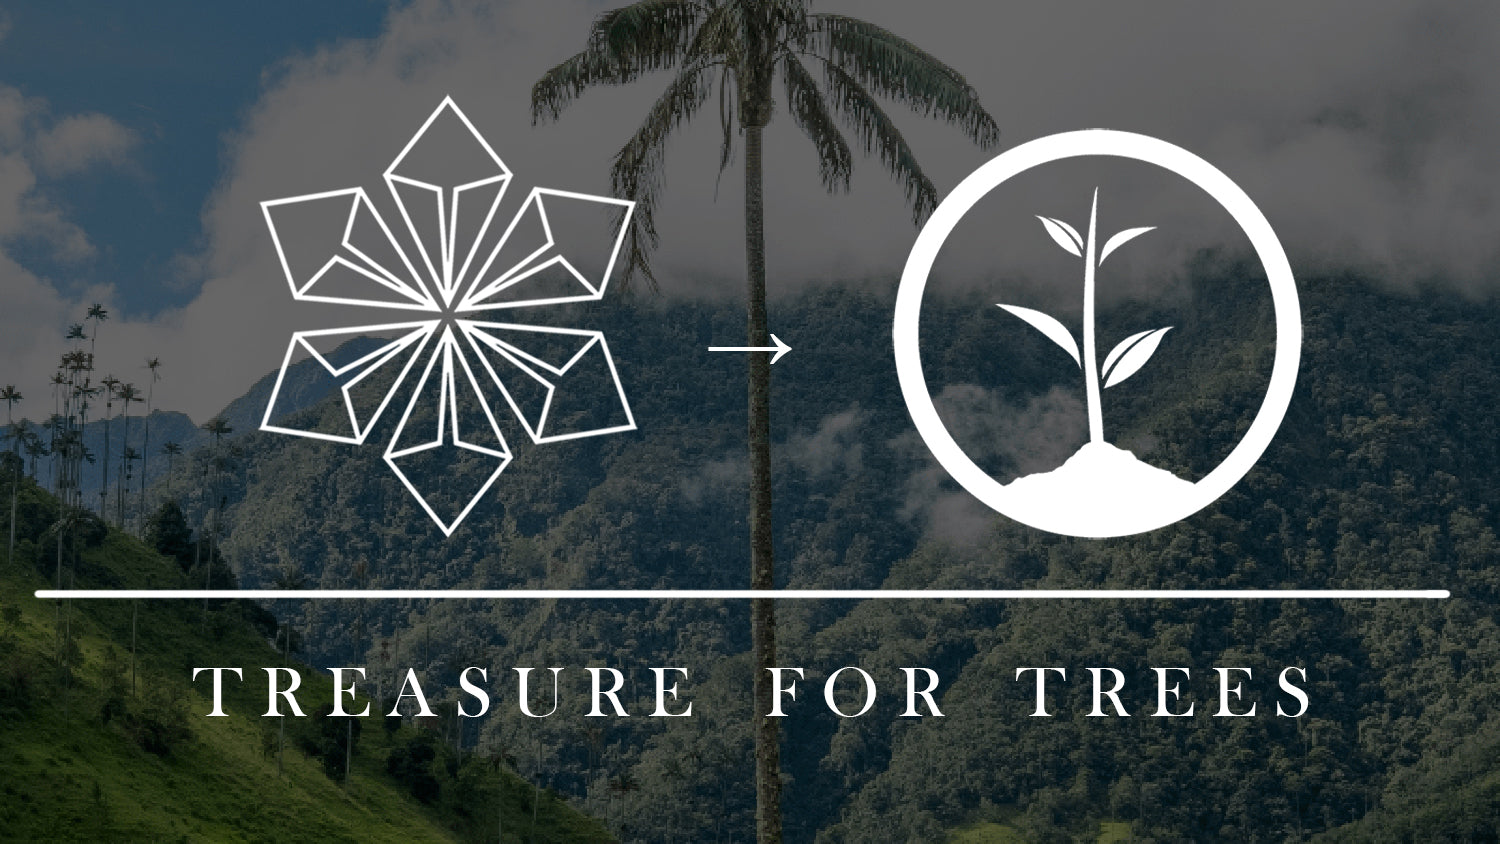 A Valentine’s Day gift to the world: Leading ethical jewellery brand Lebrusan Studio to begin planting trees for every jewel sold